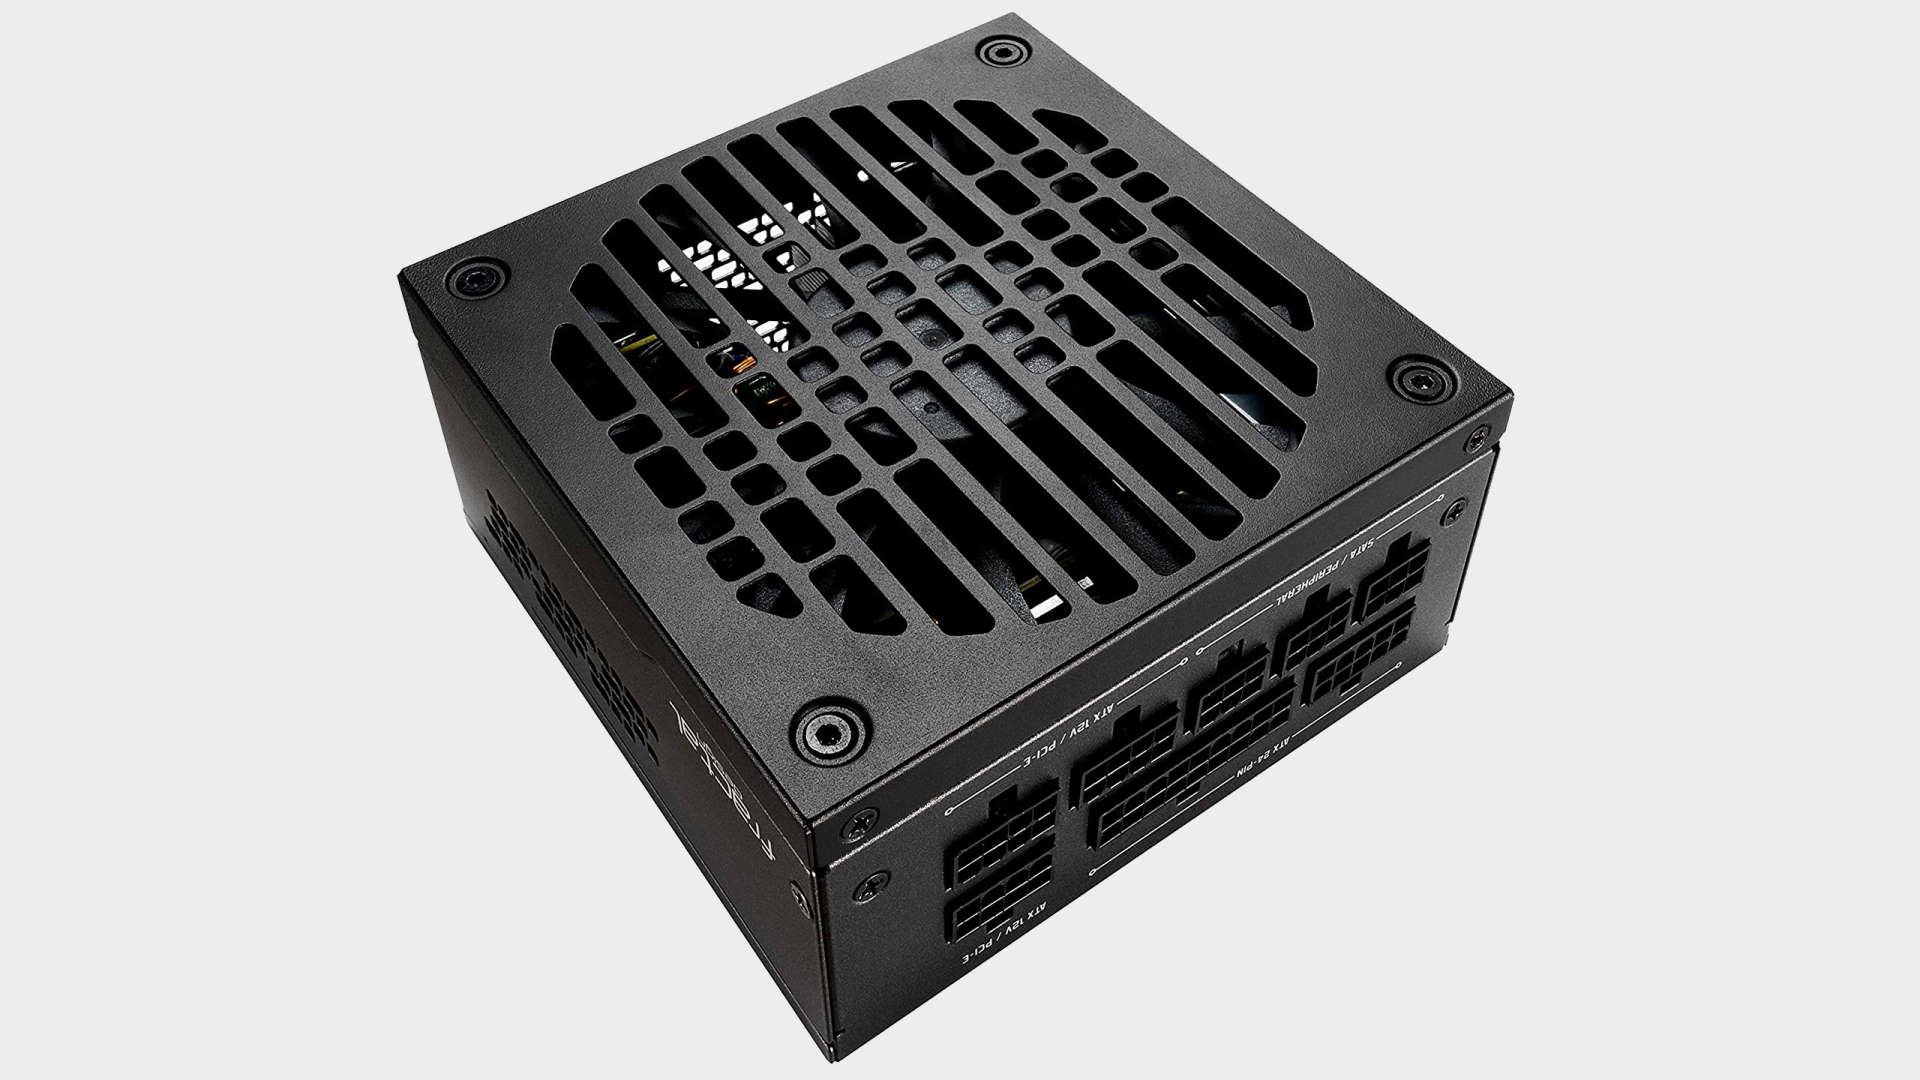 Fractal Design Ion SFX 650 Gold power supply on a grey background